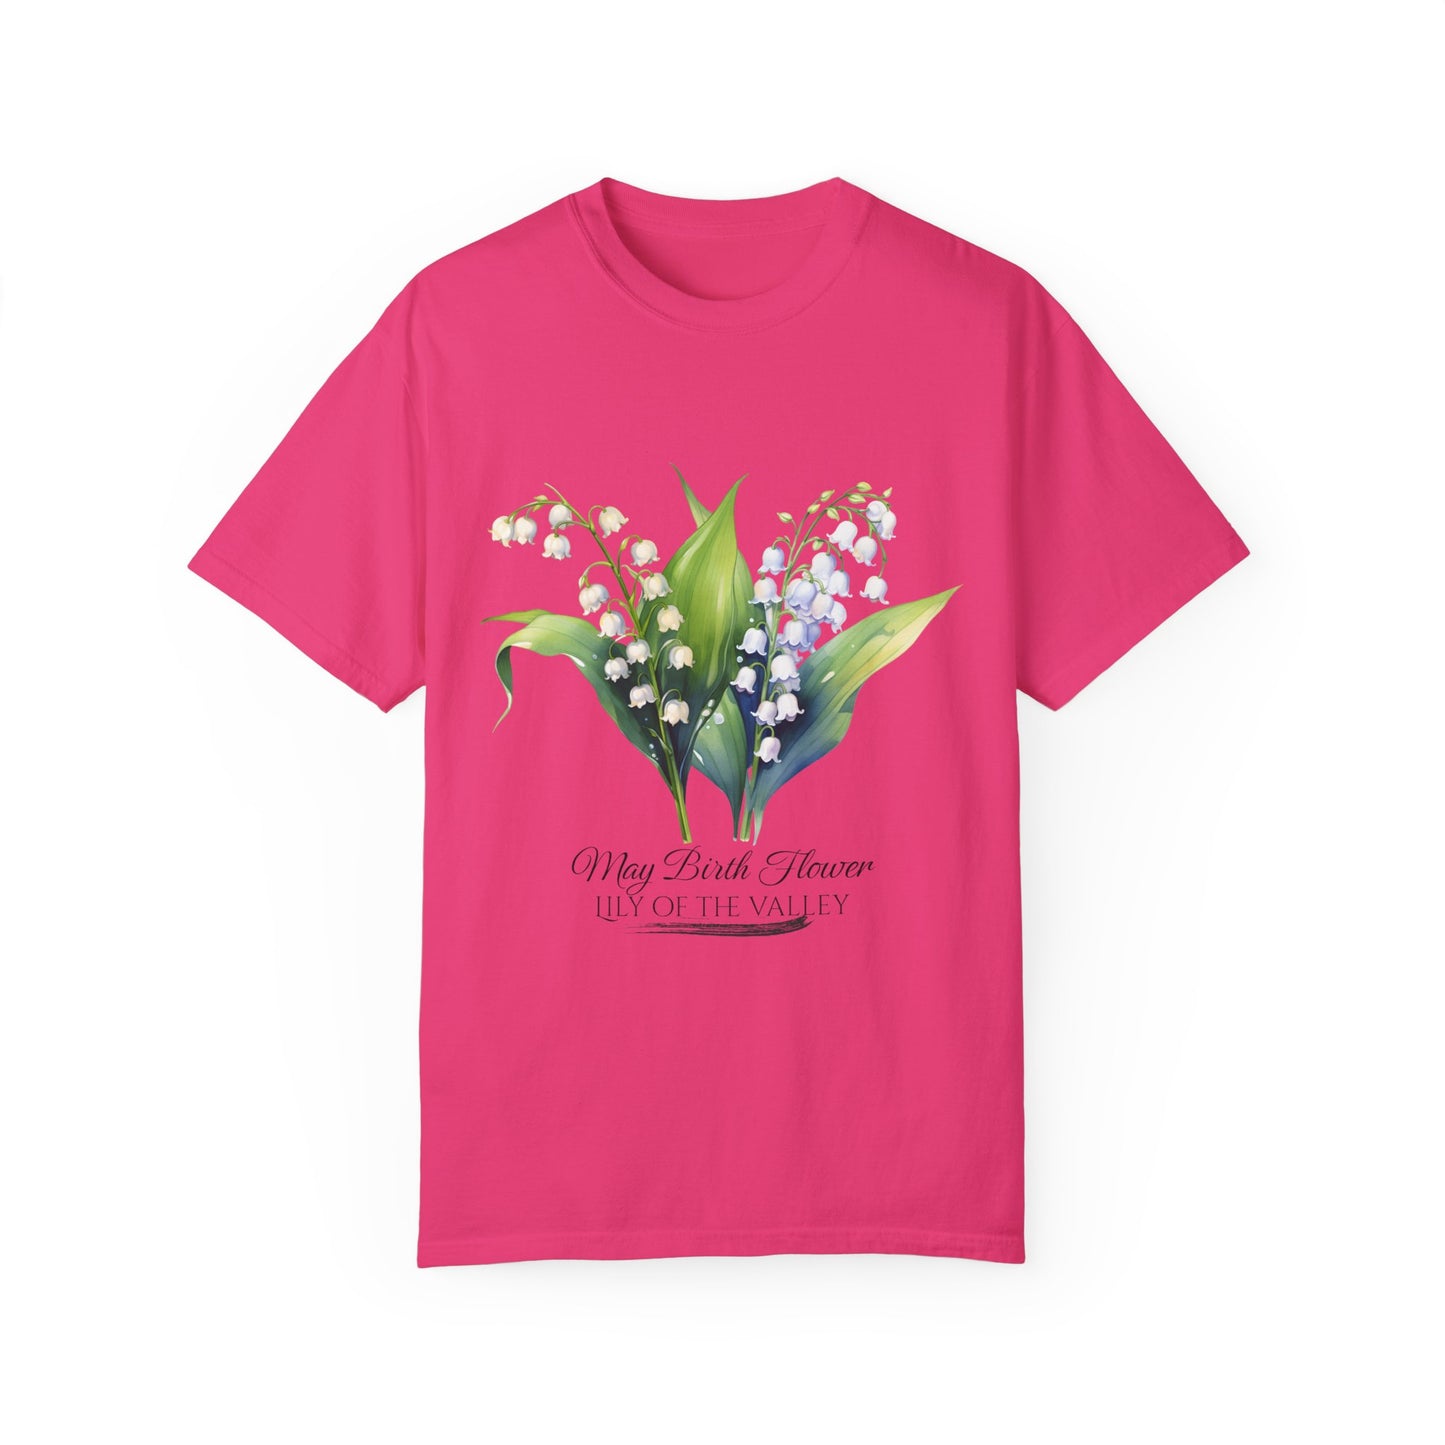 May Birth Flower "Lily of the Valley" - Unisex Garment-Dyed T-shirt